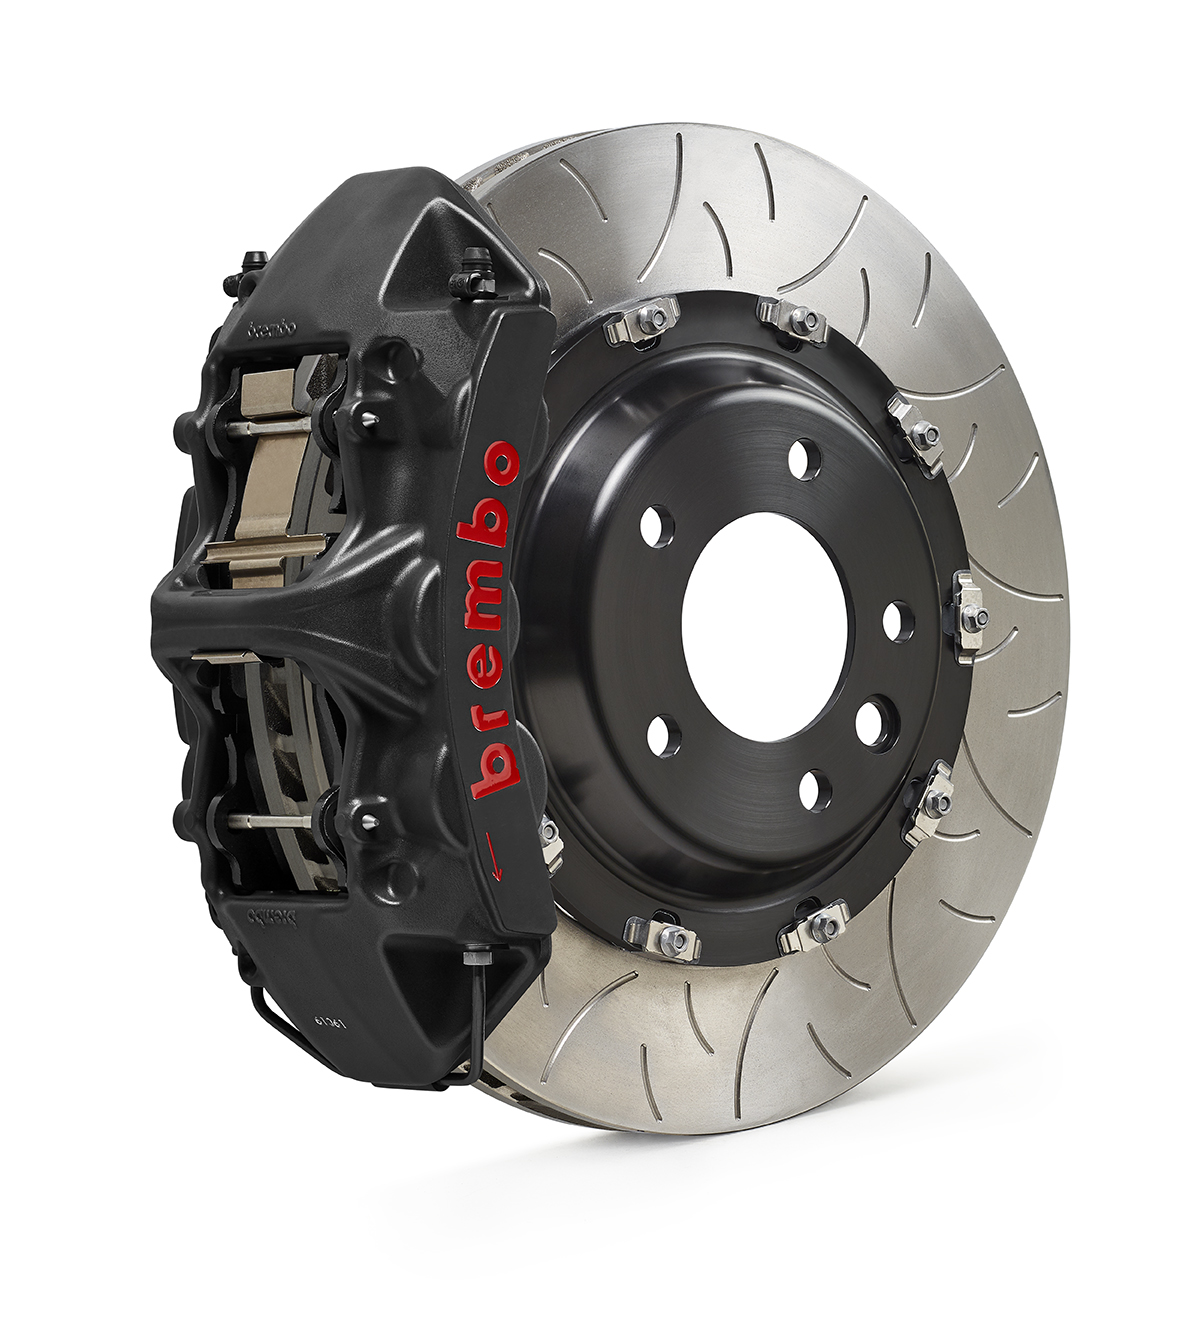 Stock brakes vs Brembo UPGRADE brakes. What's the real difference